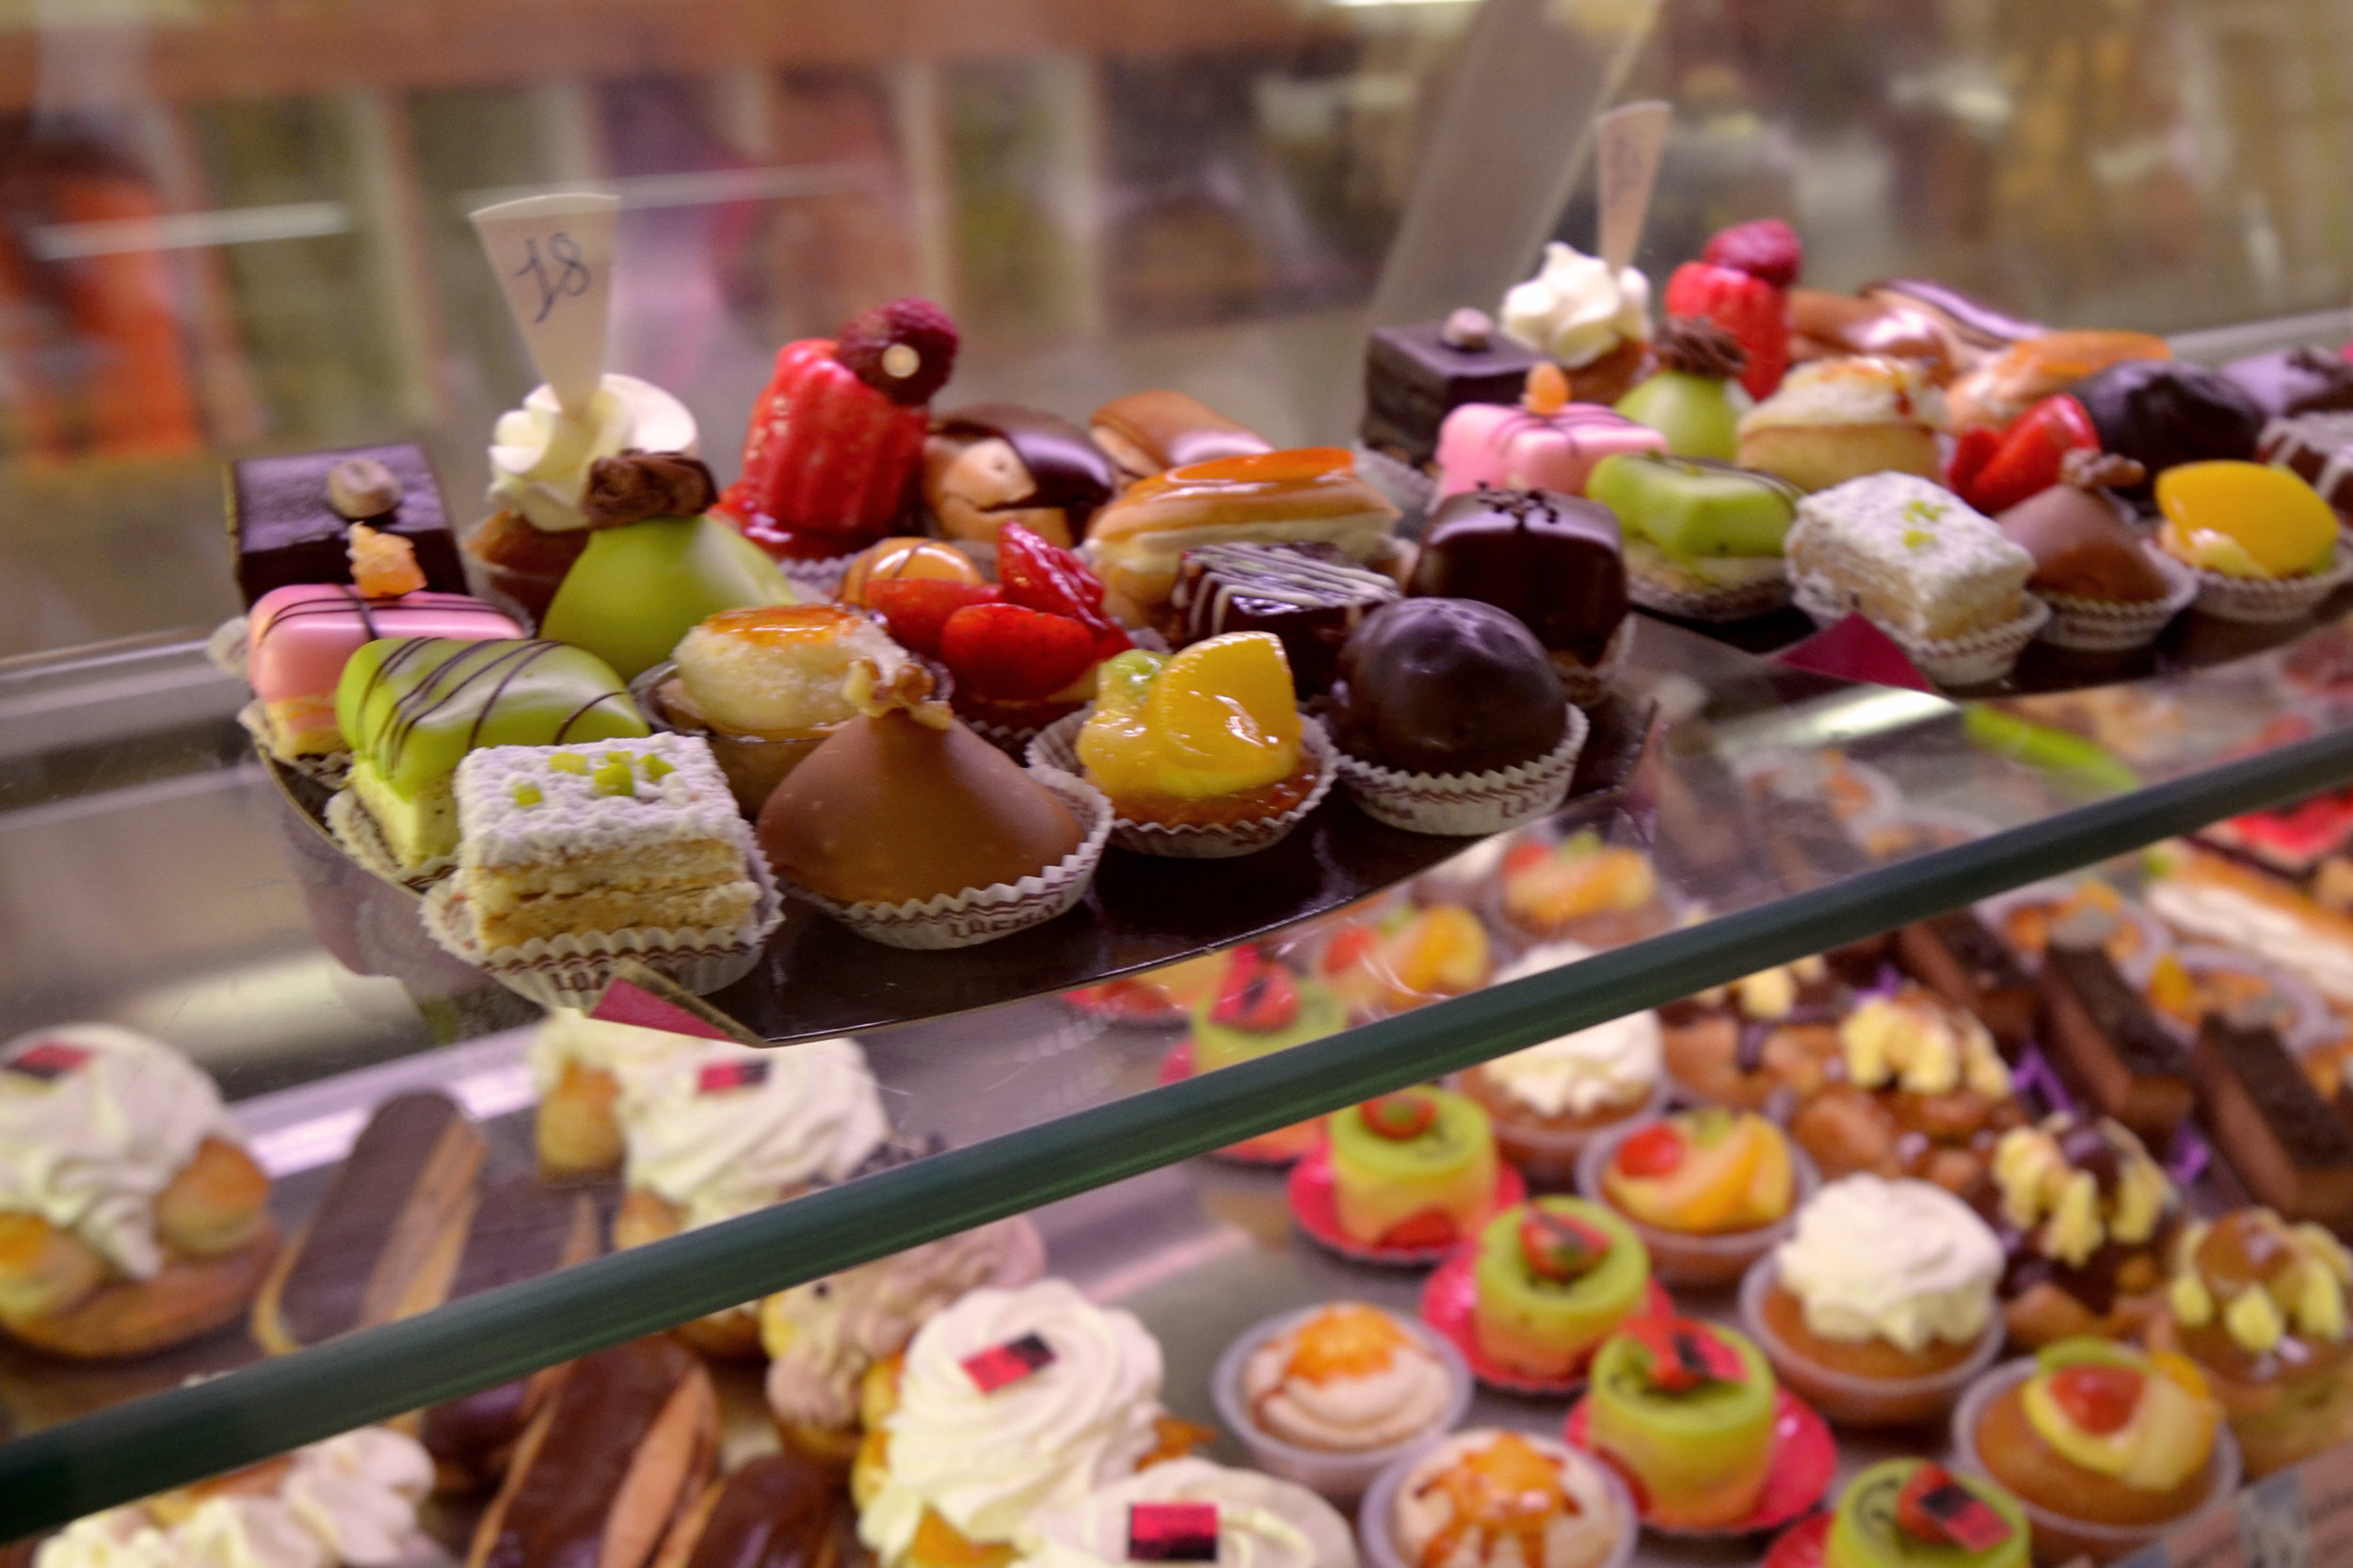 treat yourself to the abundance of cakes, pastries and sweets